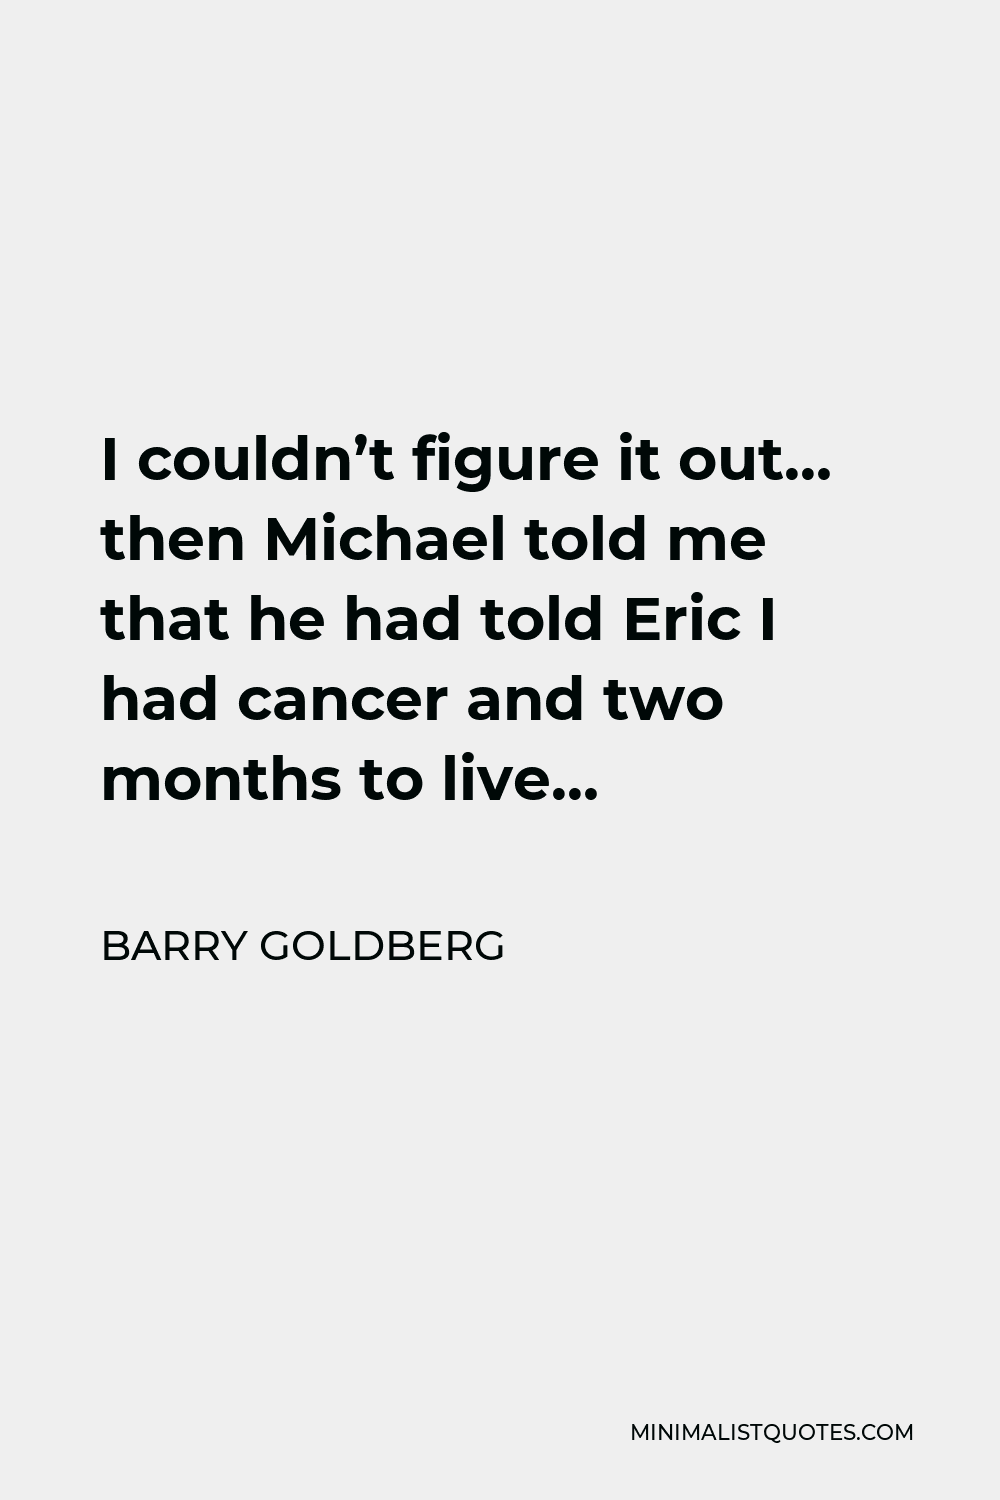 Barry Goldberg Quote - I couldn’t figure it out… then Michael told me that he had told Eric I had cancer and two months to live…